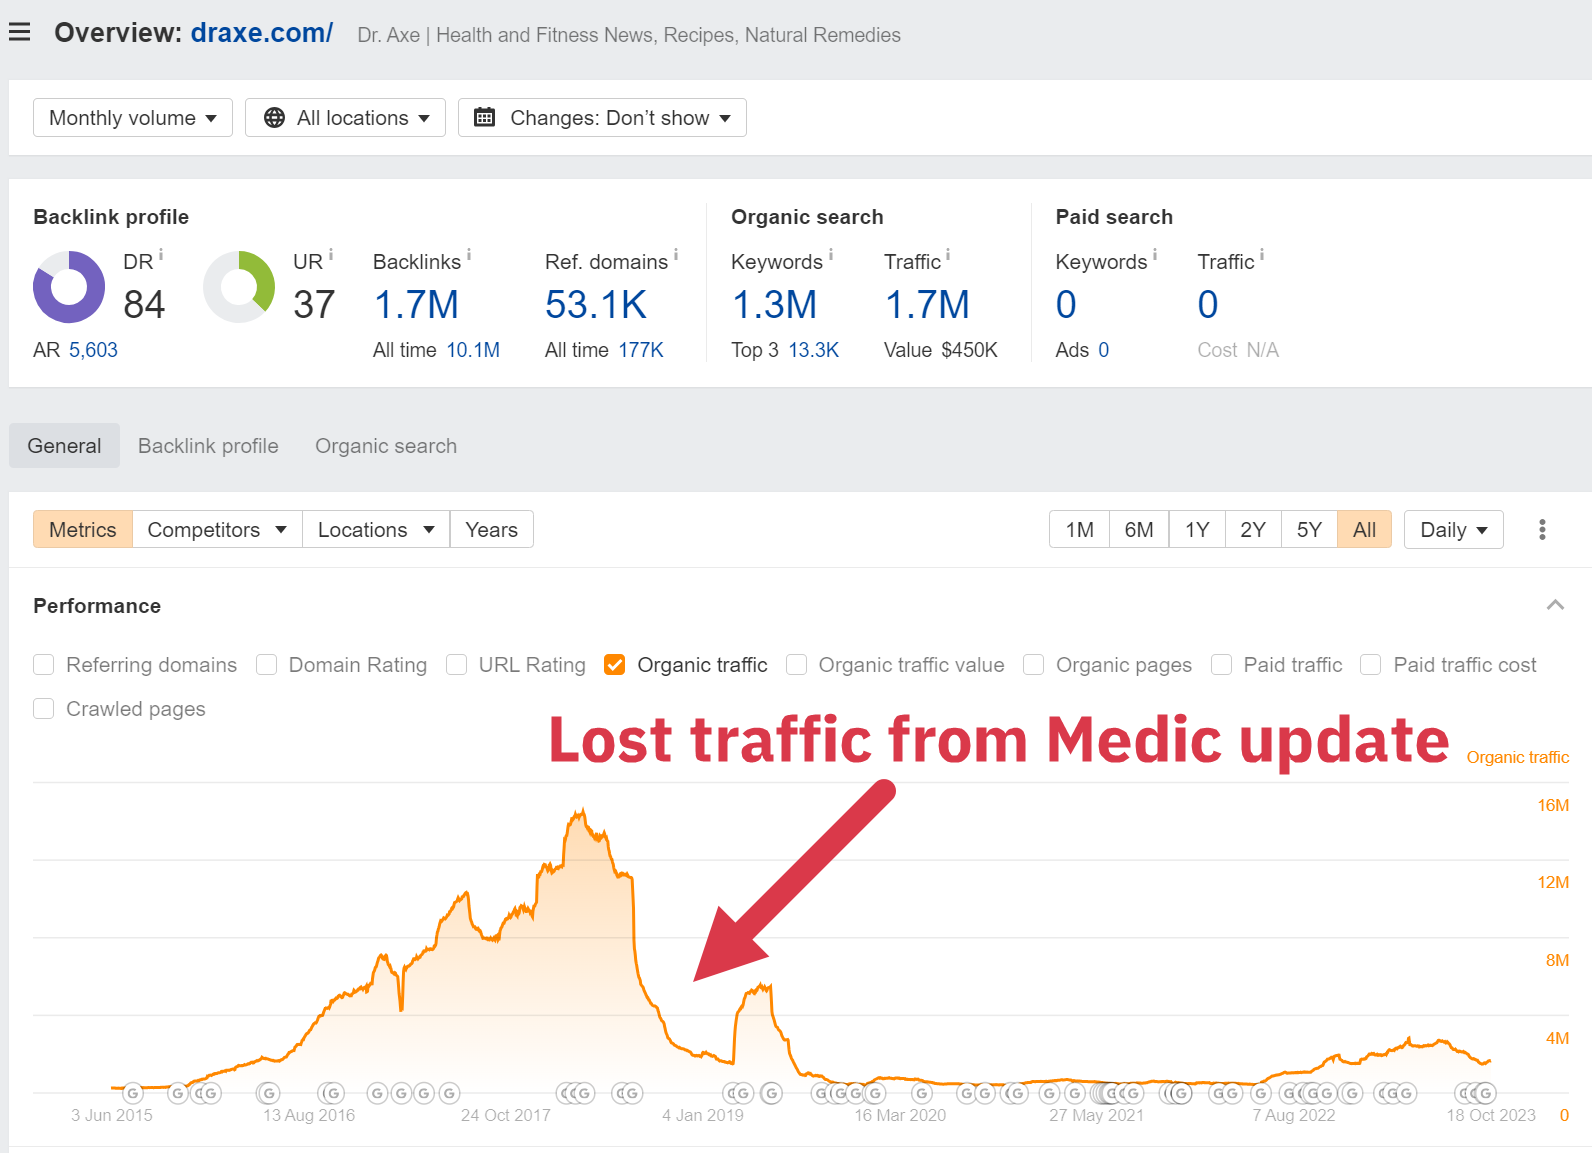 lost traffic from Medic update